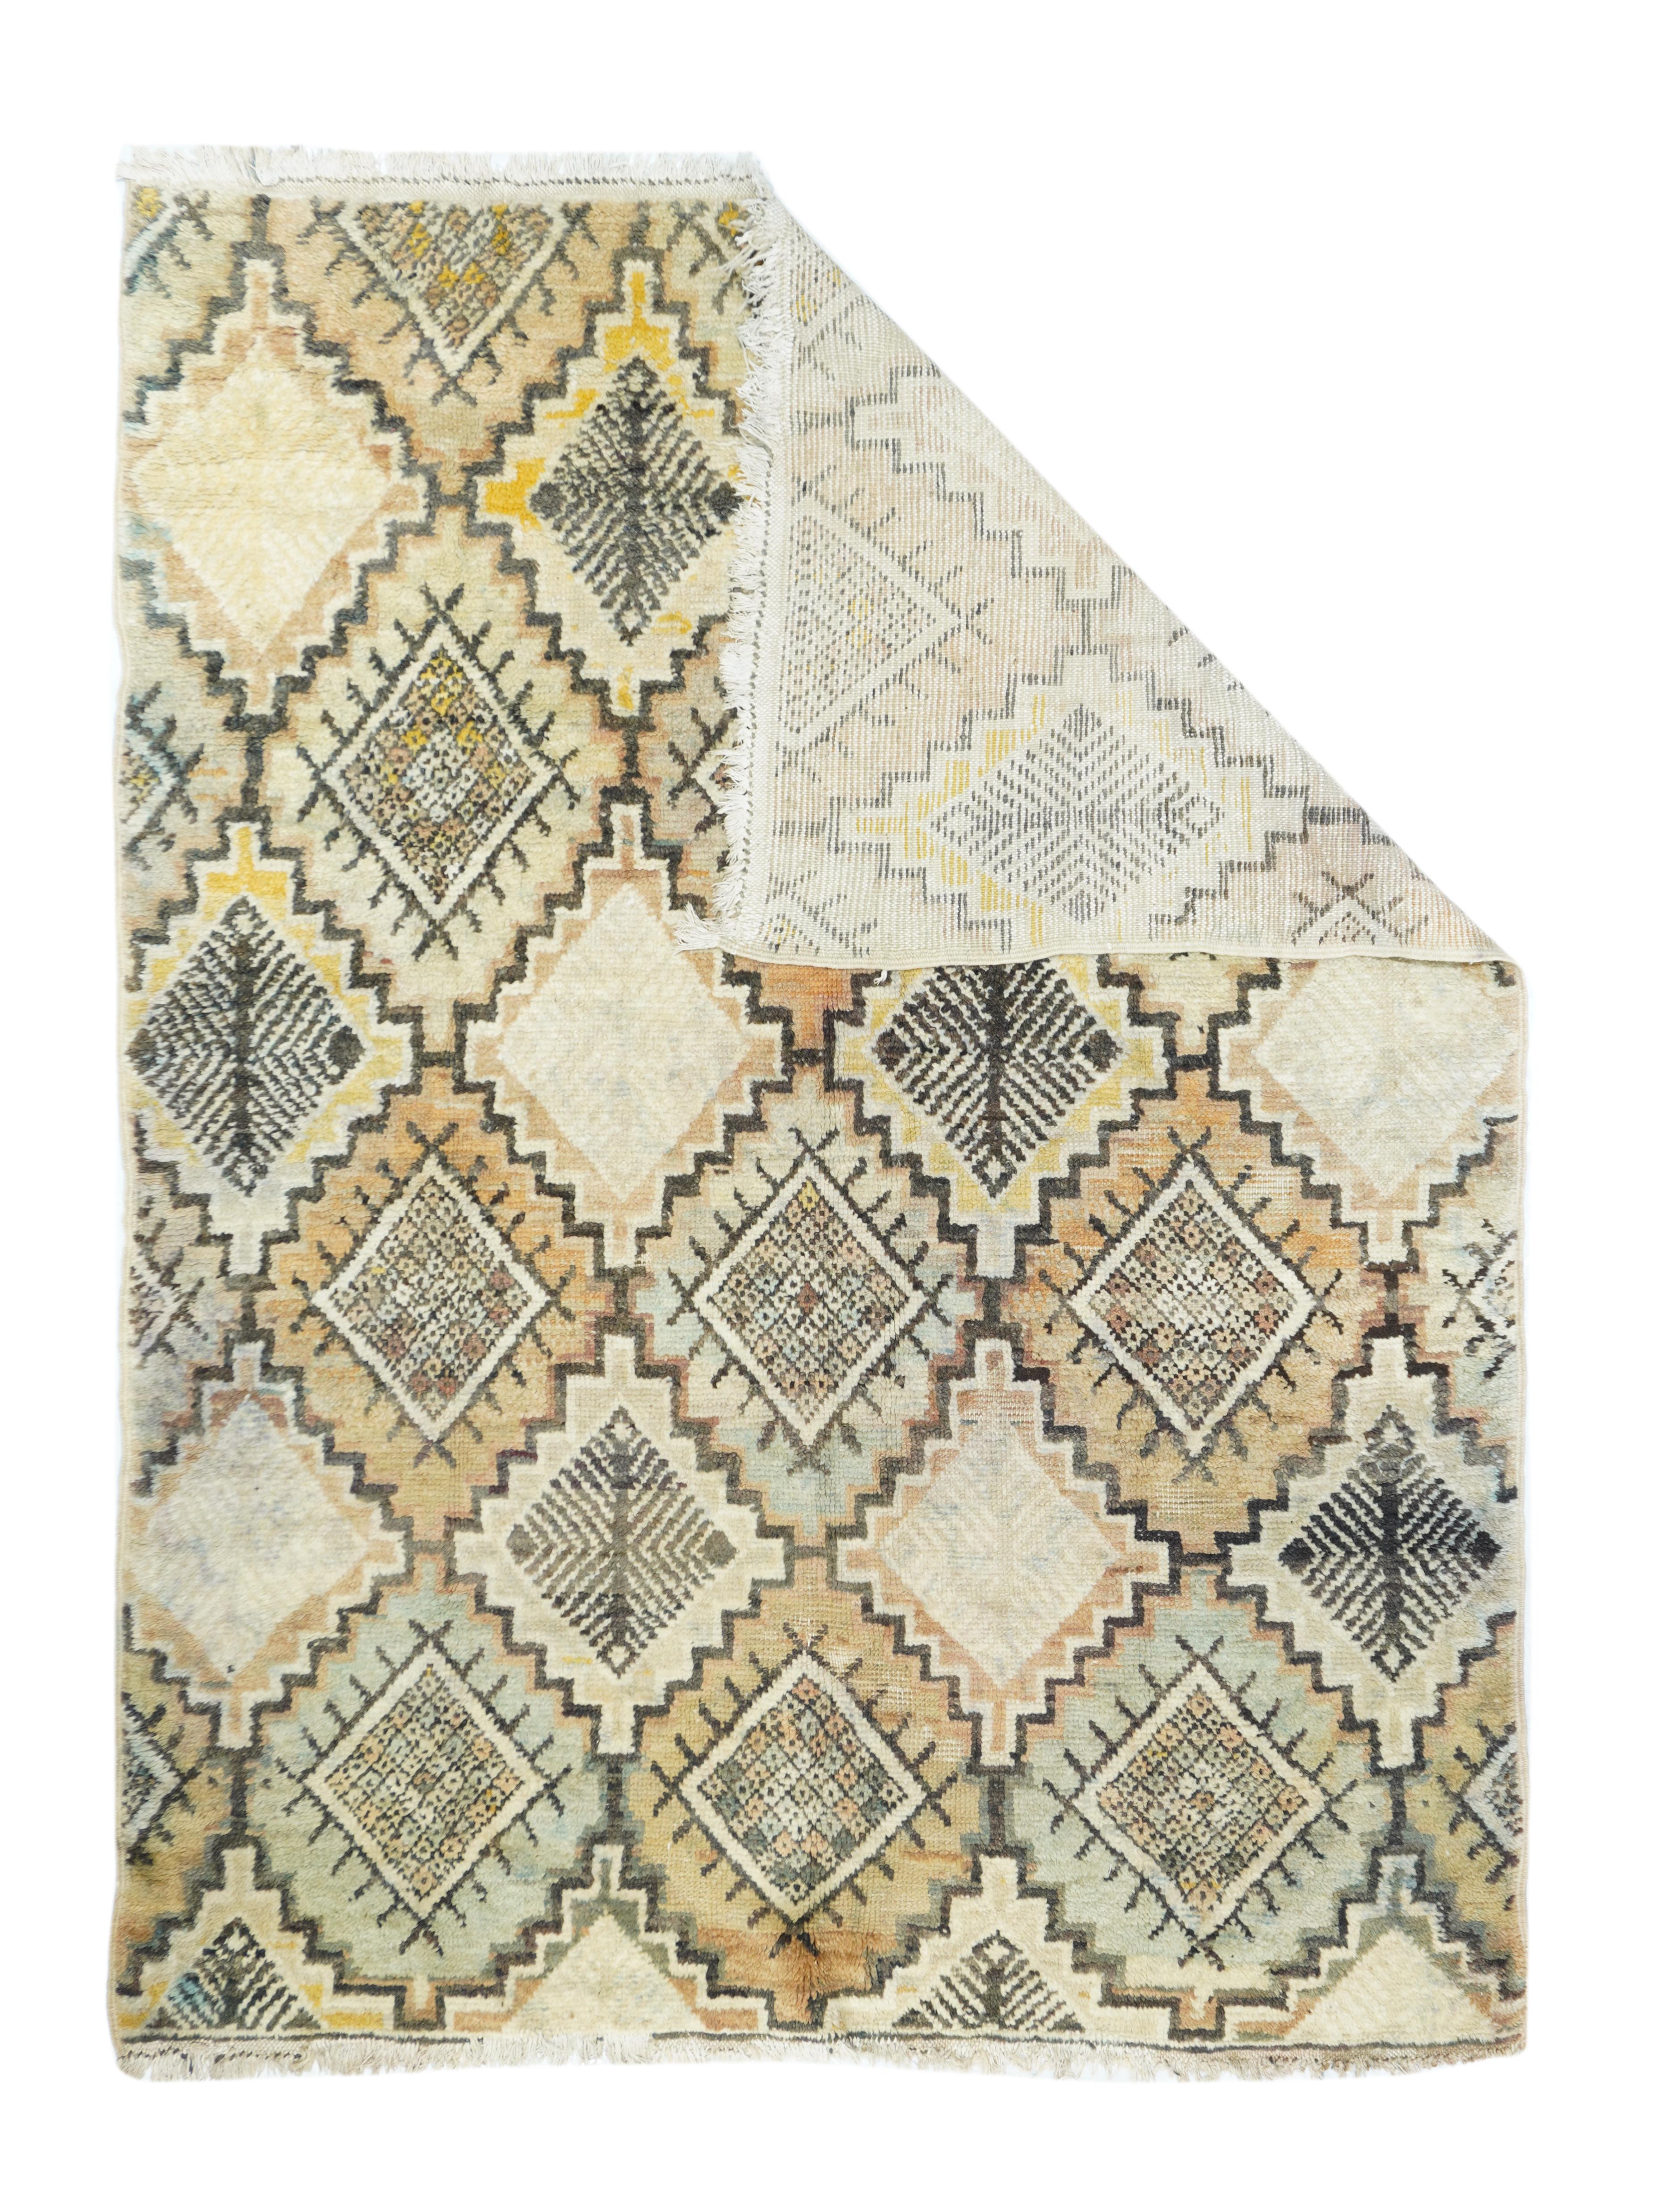 Vintage Morrocan Rug 5'4'' x 7'2''. This totally borderless Berber, coarse weave, high pile scatter, shows a stepped lozenge lattice with the reserves displaying fringed lozenges of quadruple herringbone devices. Straw, sand, pale green, brown and